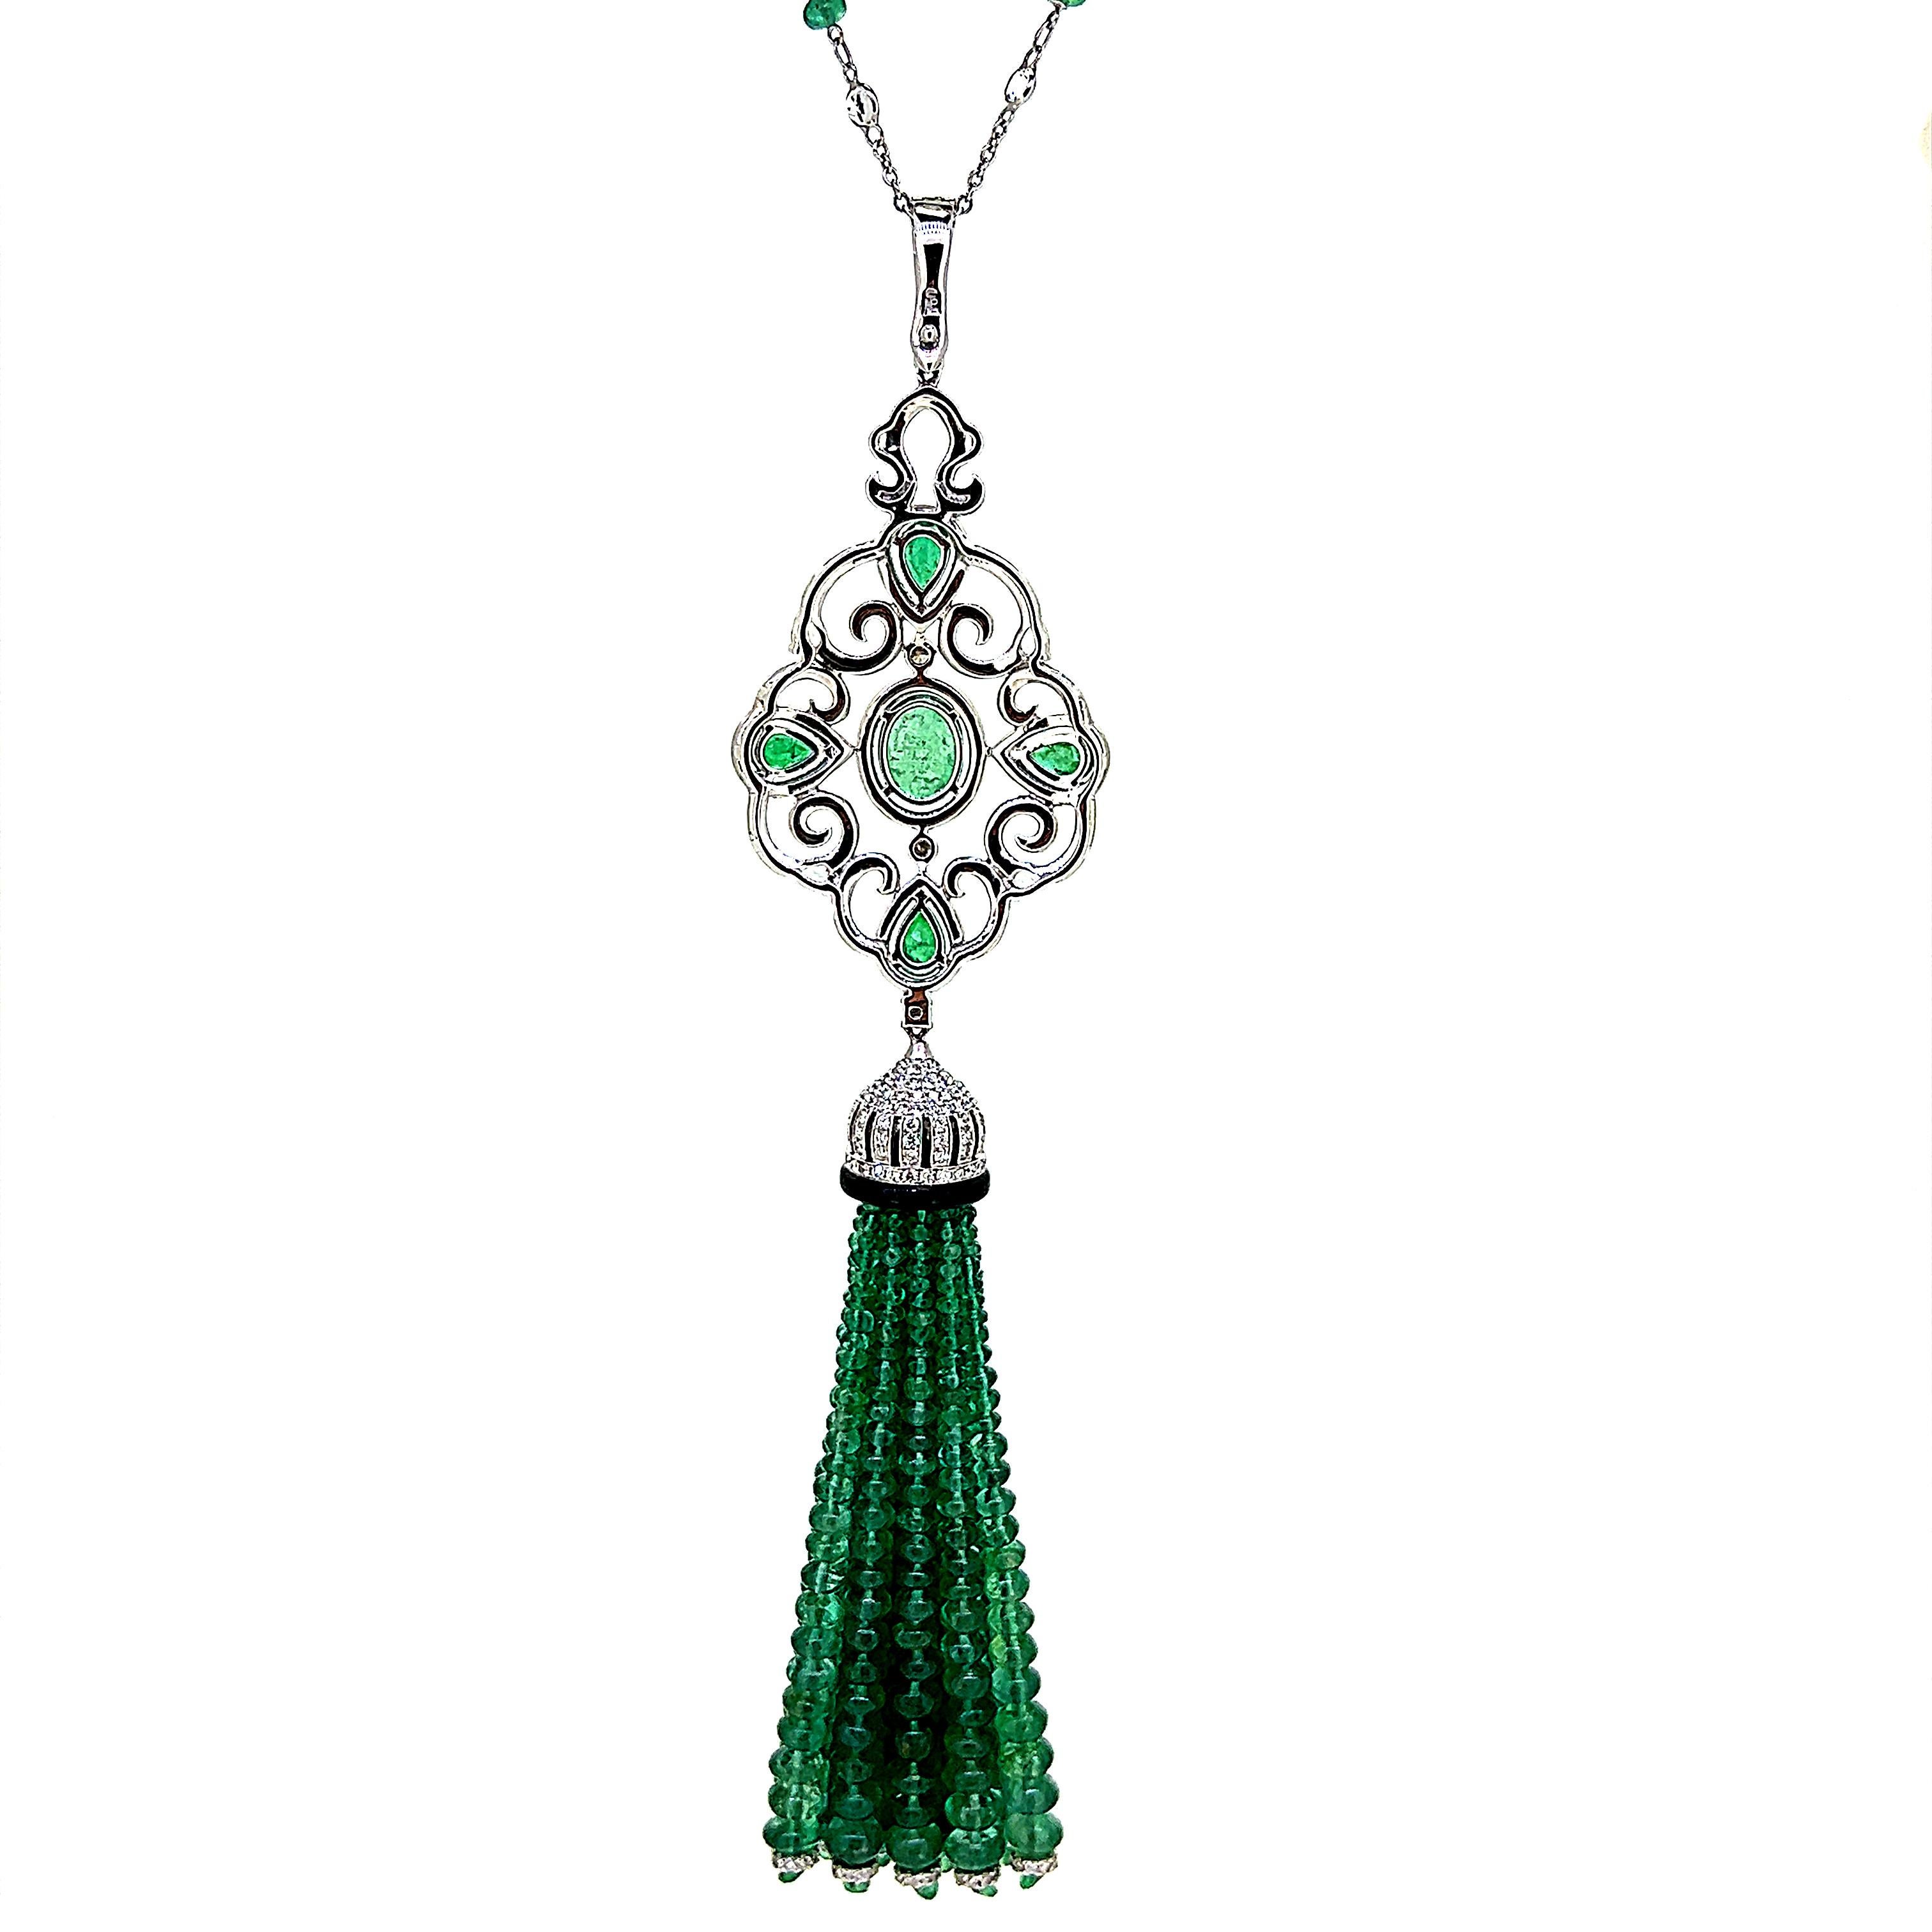 This is a stunning Emerald, Diamond and Onyx Tassel Necklace weighing 96.93 carats in total.  This remarkable piece features glimmering beads with various cut and sizes of emerald and diamonds set on 18 Karat White Gold.  Chain consists of emerald